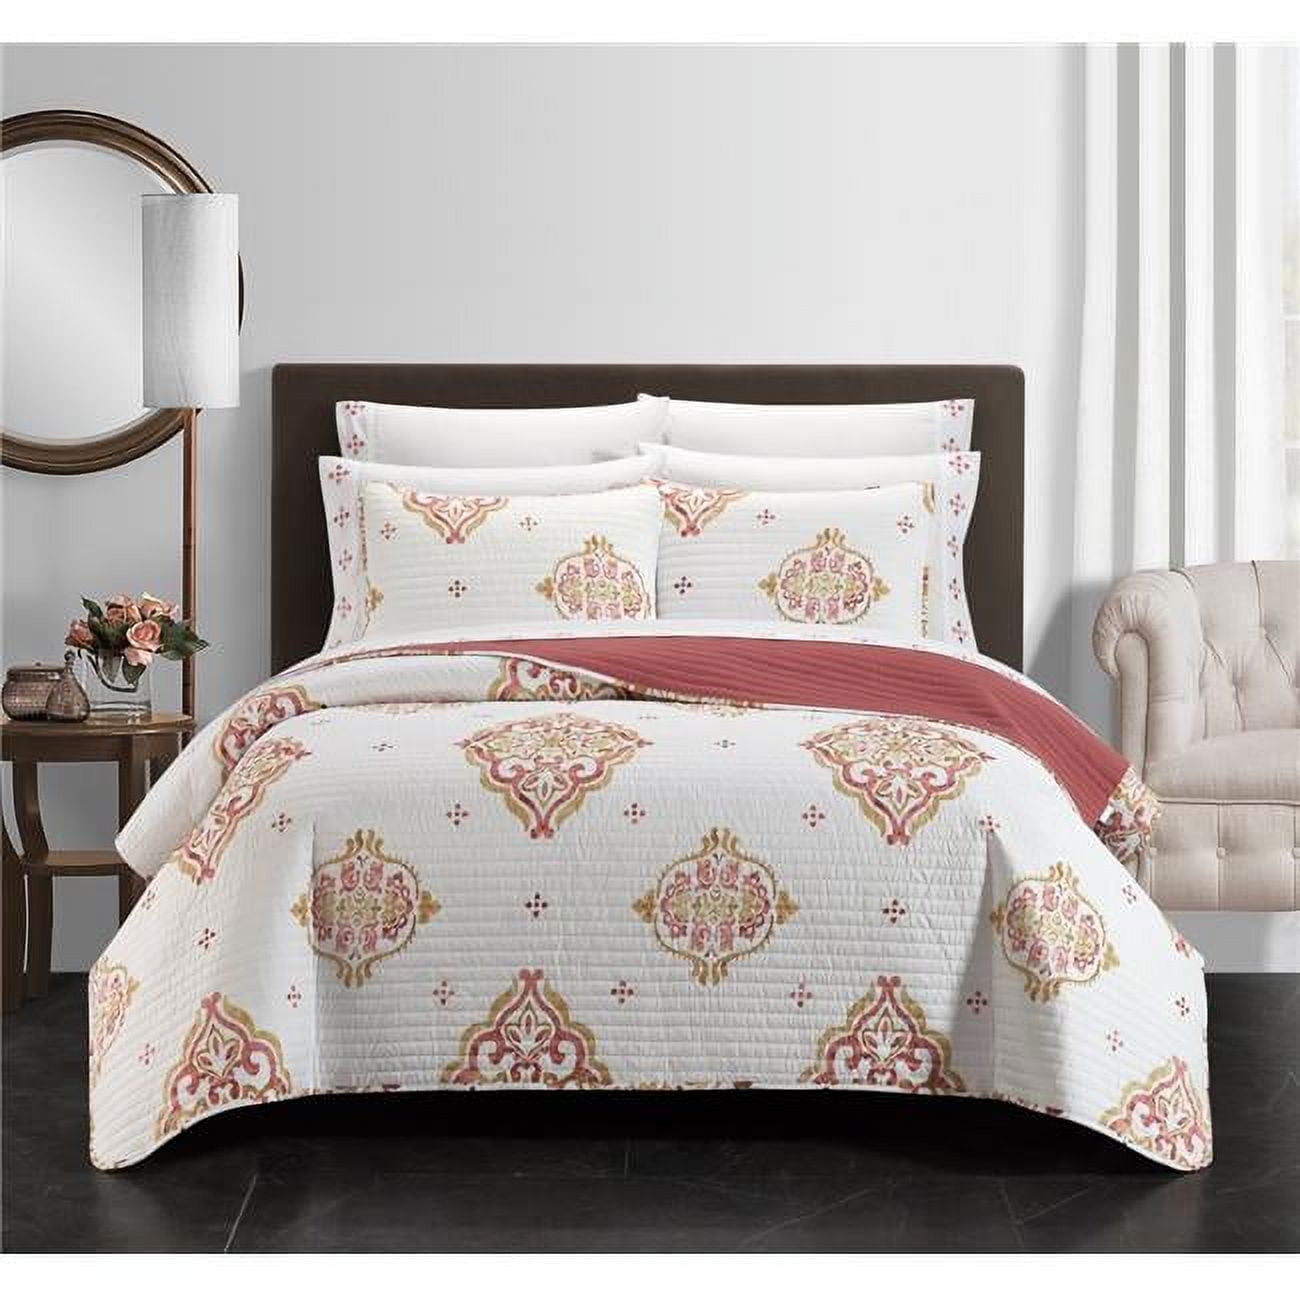 BQS23674-US 9 Piece Bugatti Quilt Set - Coral, Gold & White - Full Size -  Chic Home